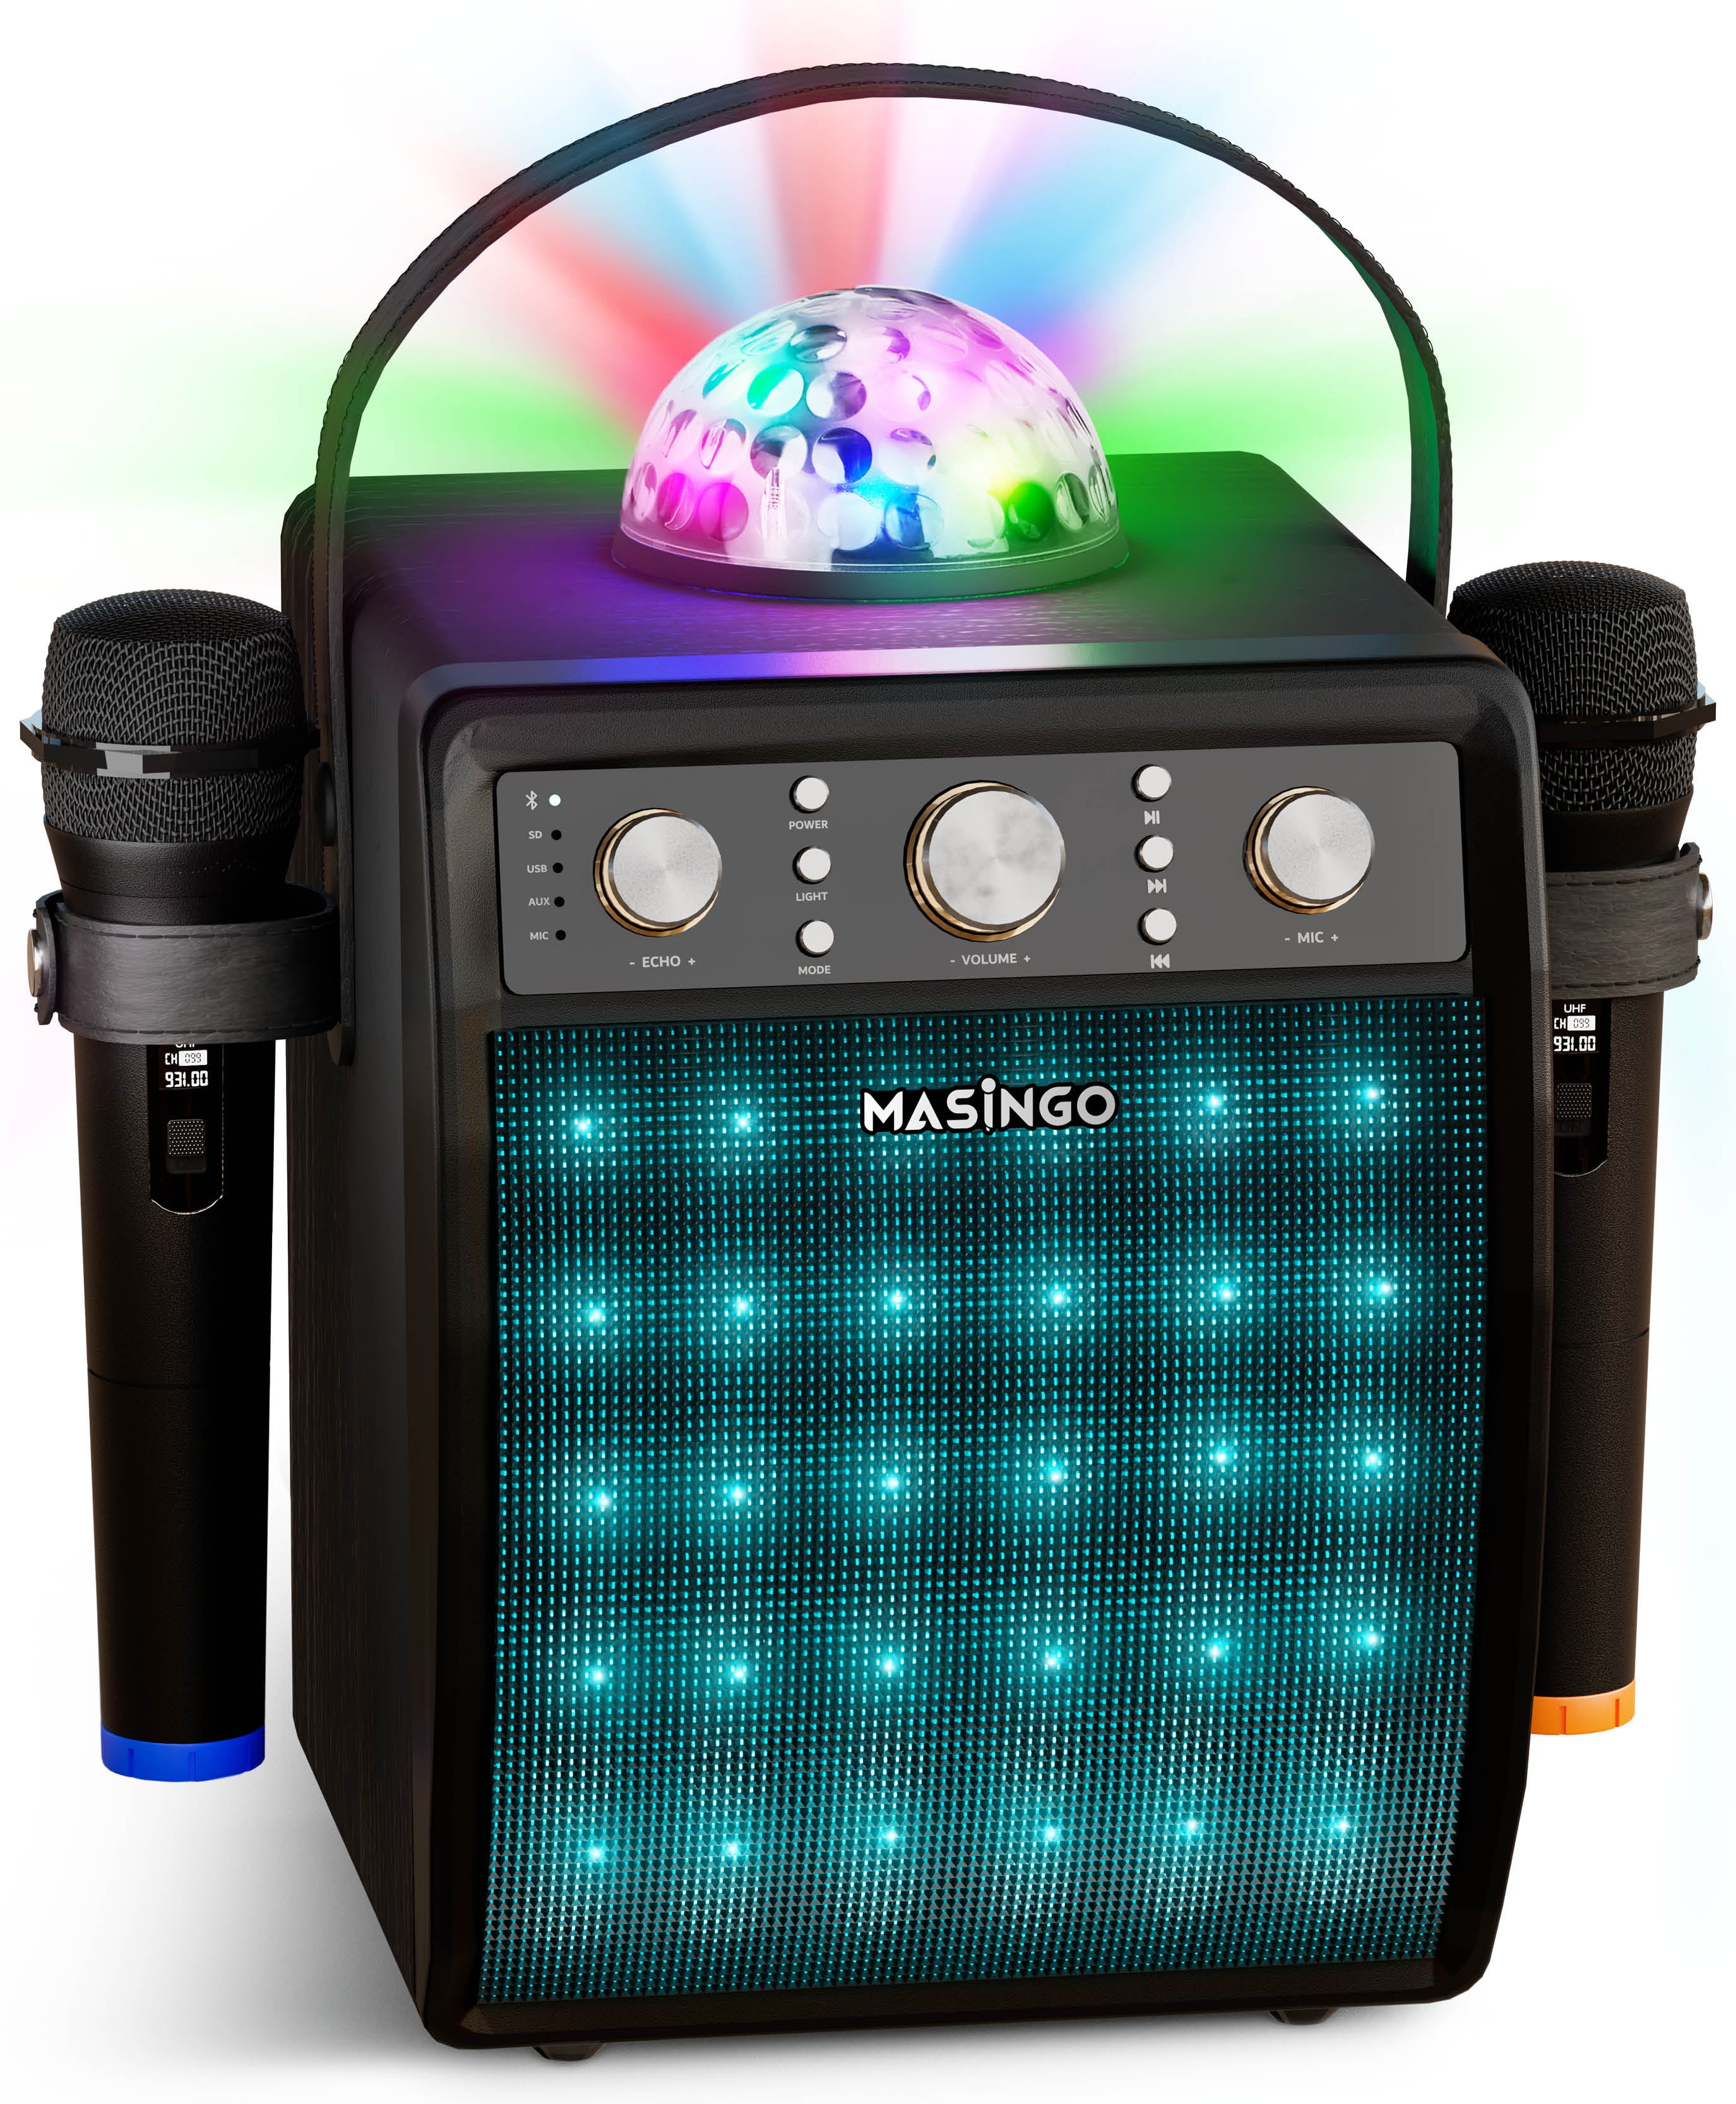 Unique Design Singing Machine with Bluetooth Speaker PA System LED Lights Phone Holder Microphones Perfect for Home Party Holidays Celebration Portable Karaoke Machine for Kids & Adults 